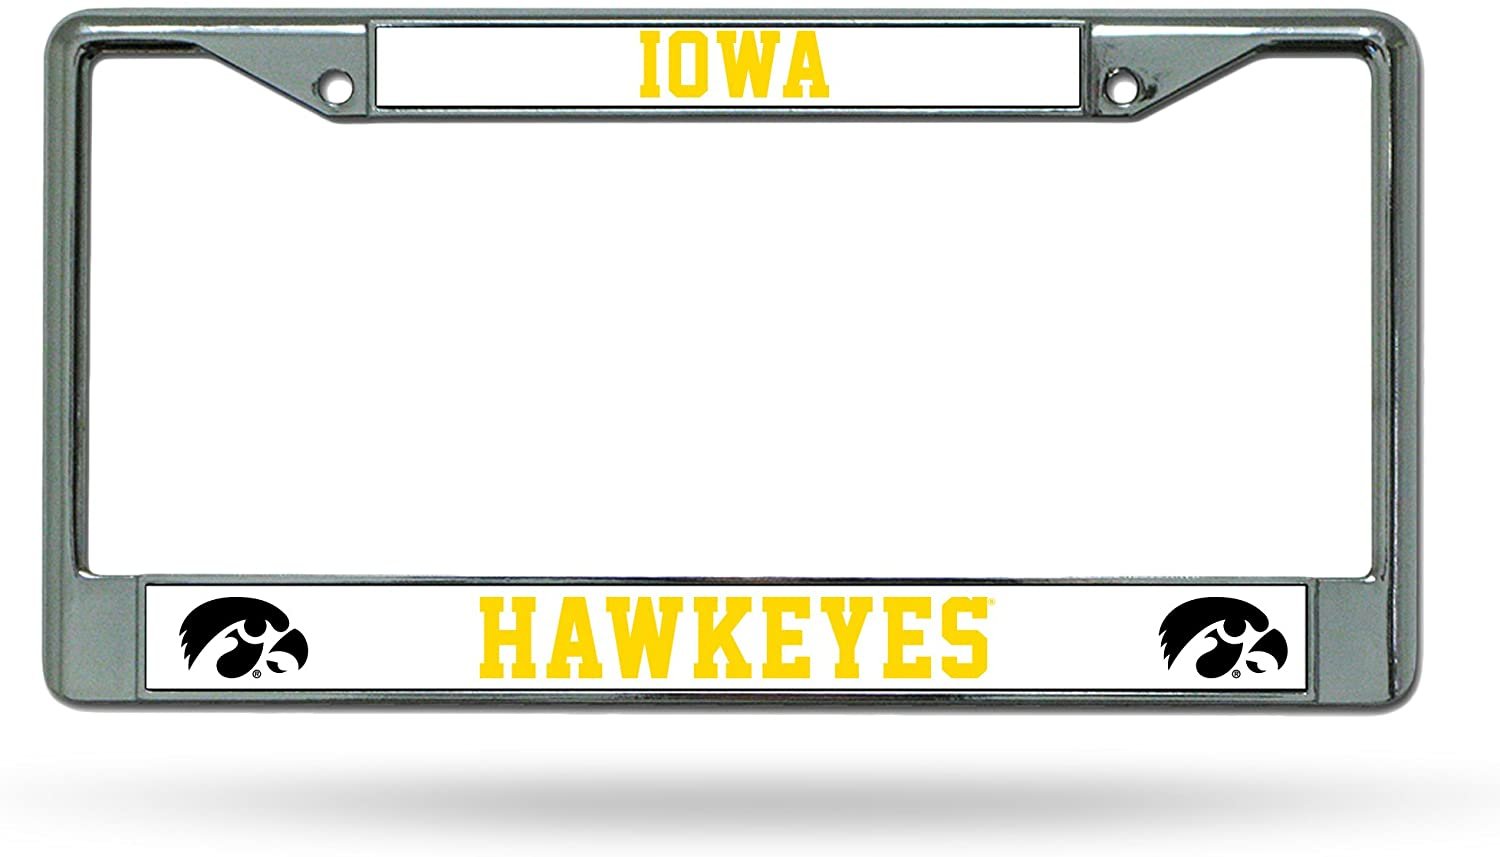 University of Iowa Hawkeyes Chrome Metal License Plate Frame Tag Cover, 6x12 Inch